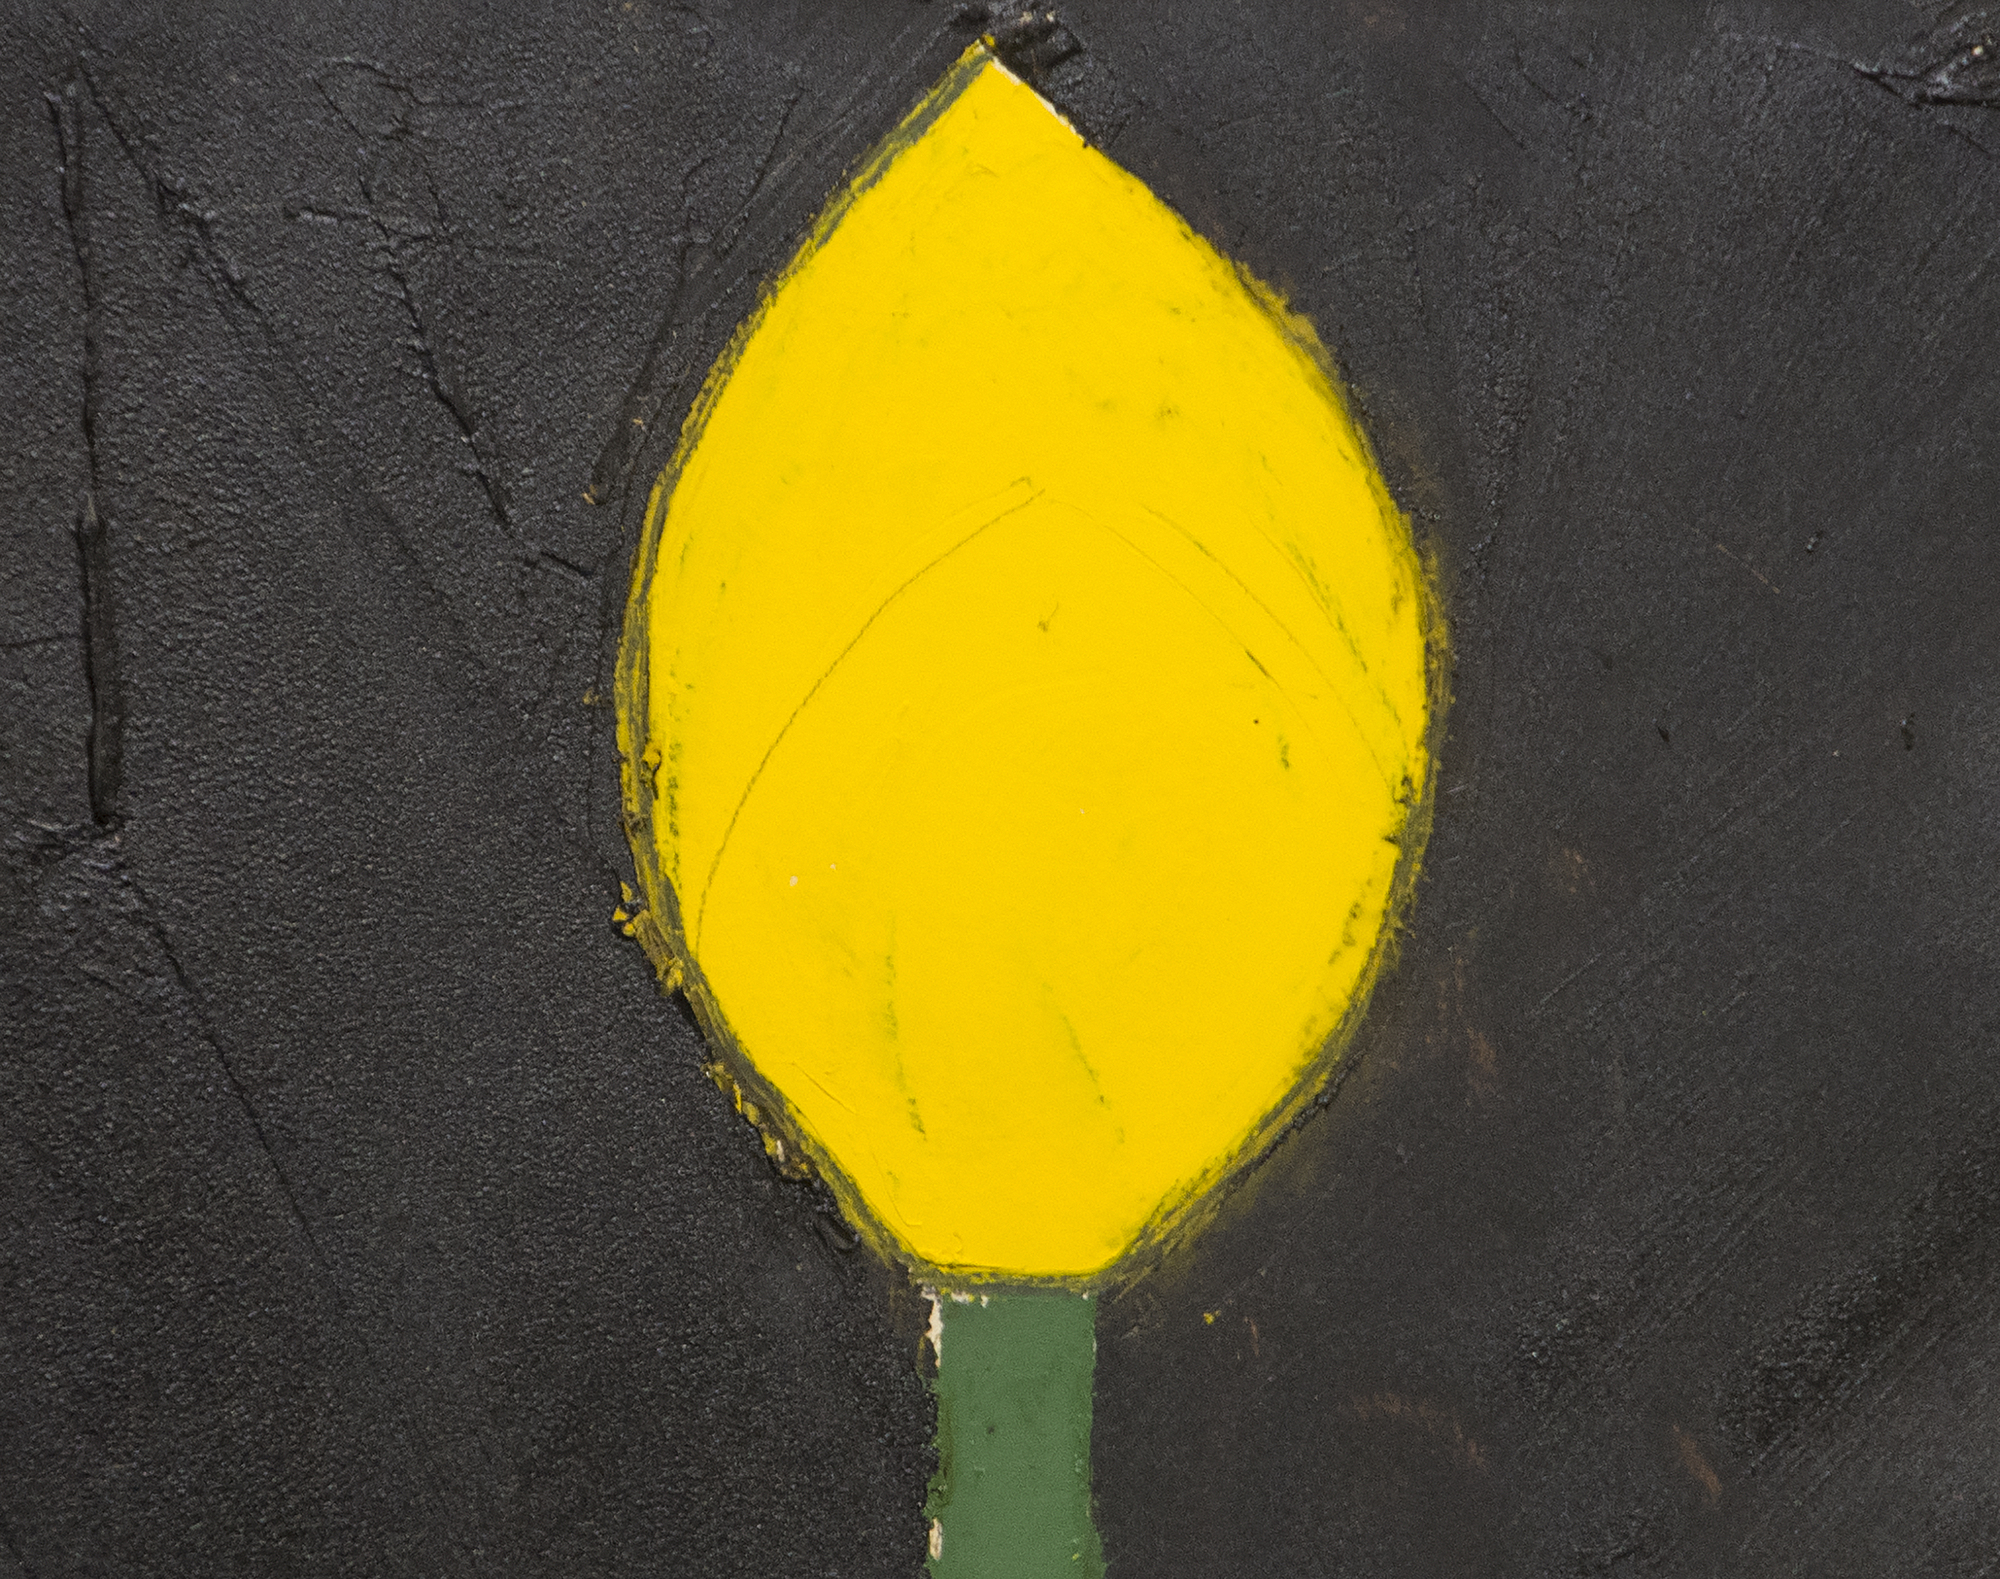 DONALD SULTAN - Yellow Tulip #18 - oil and tar on paper - 20 x 20 in.